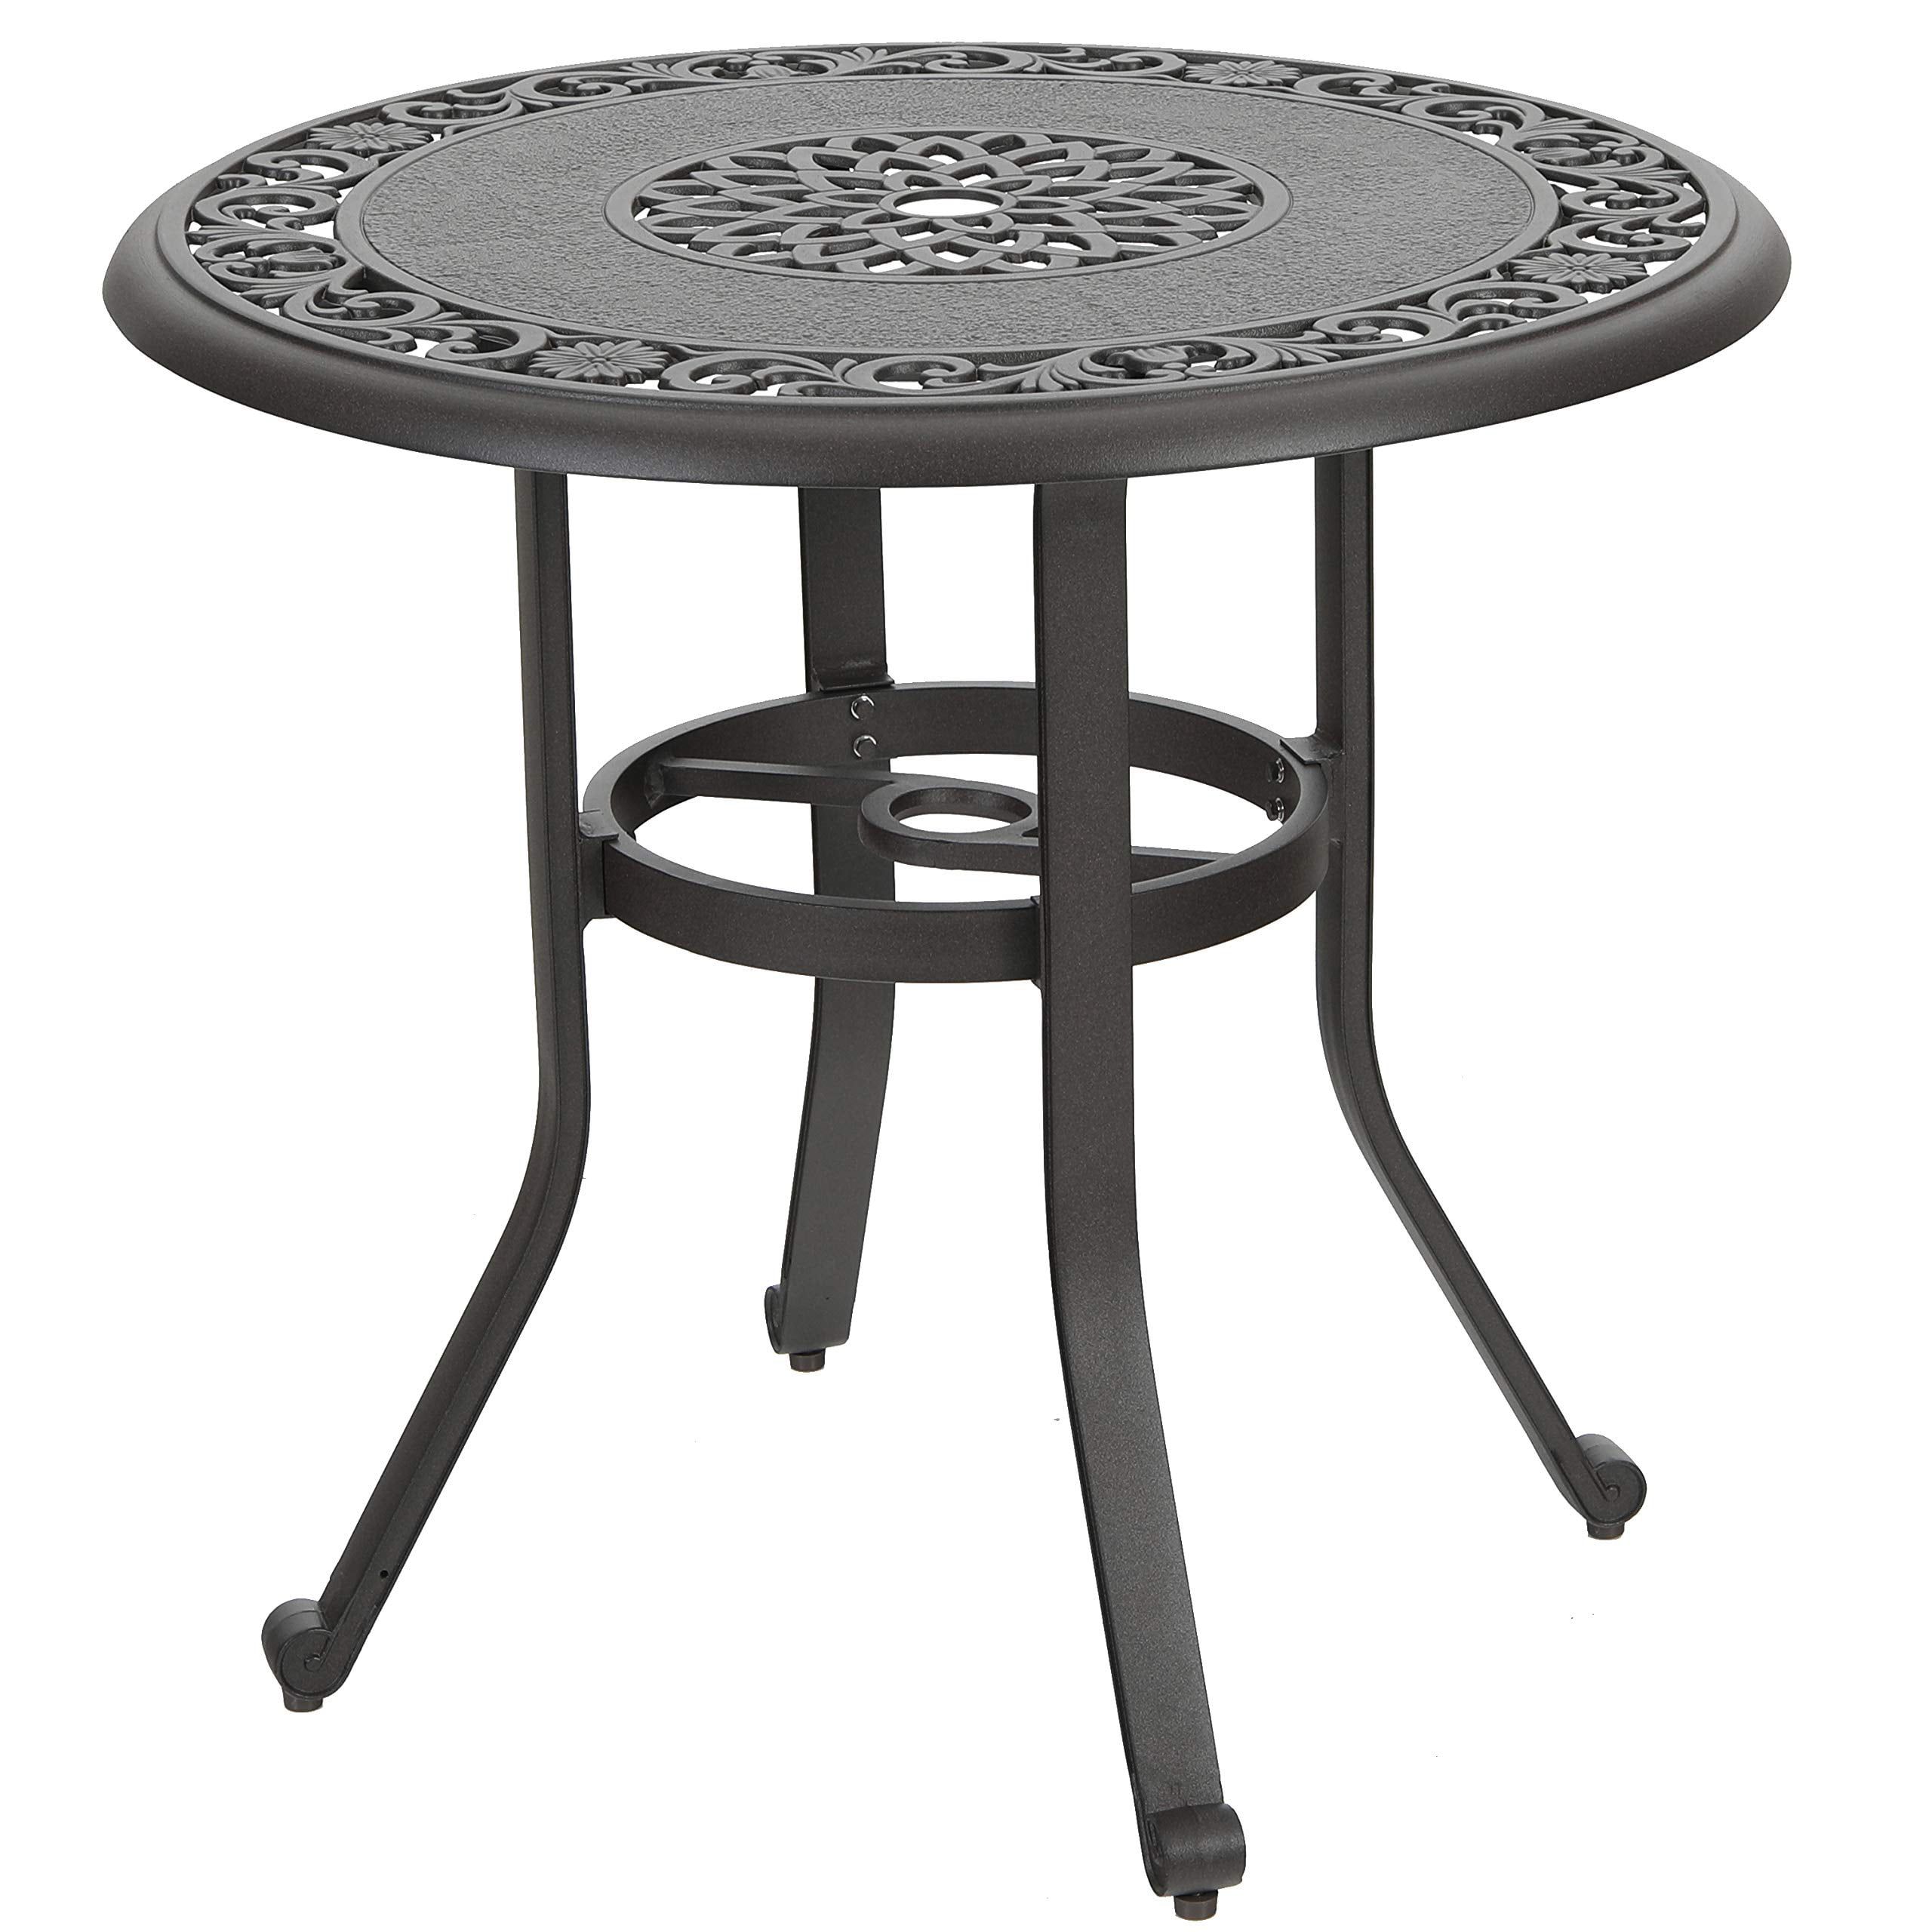 Newest Mf Studio 32" Cast Aluminum Patio Outdoor Bistro Table, Round Dining Intended For Round Steel Patio Coffee Tables (View 9 of 15)